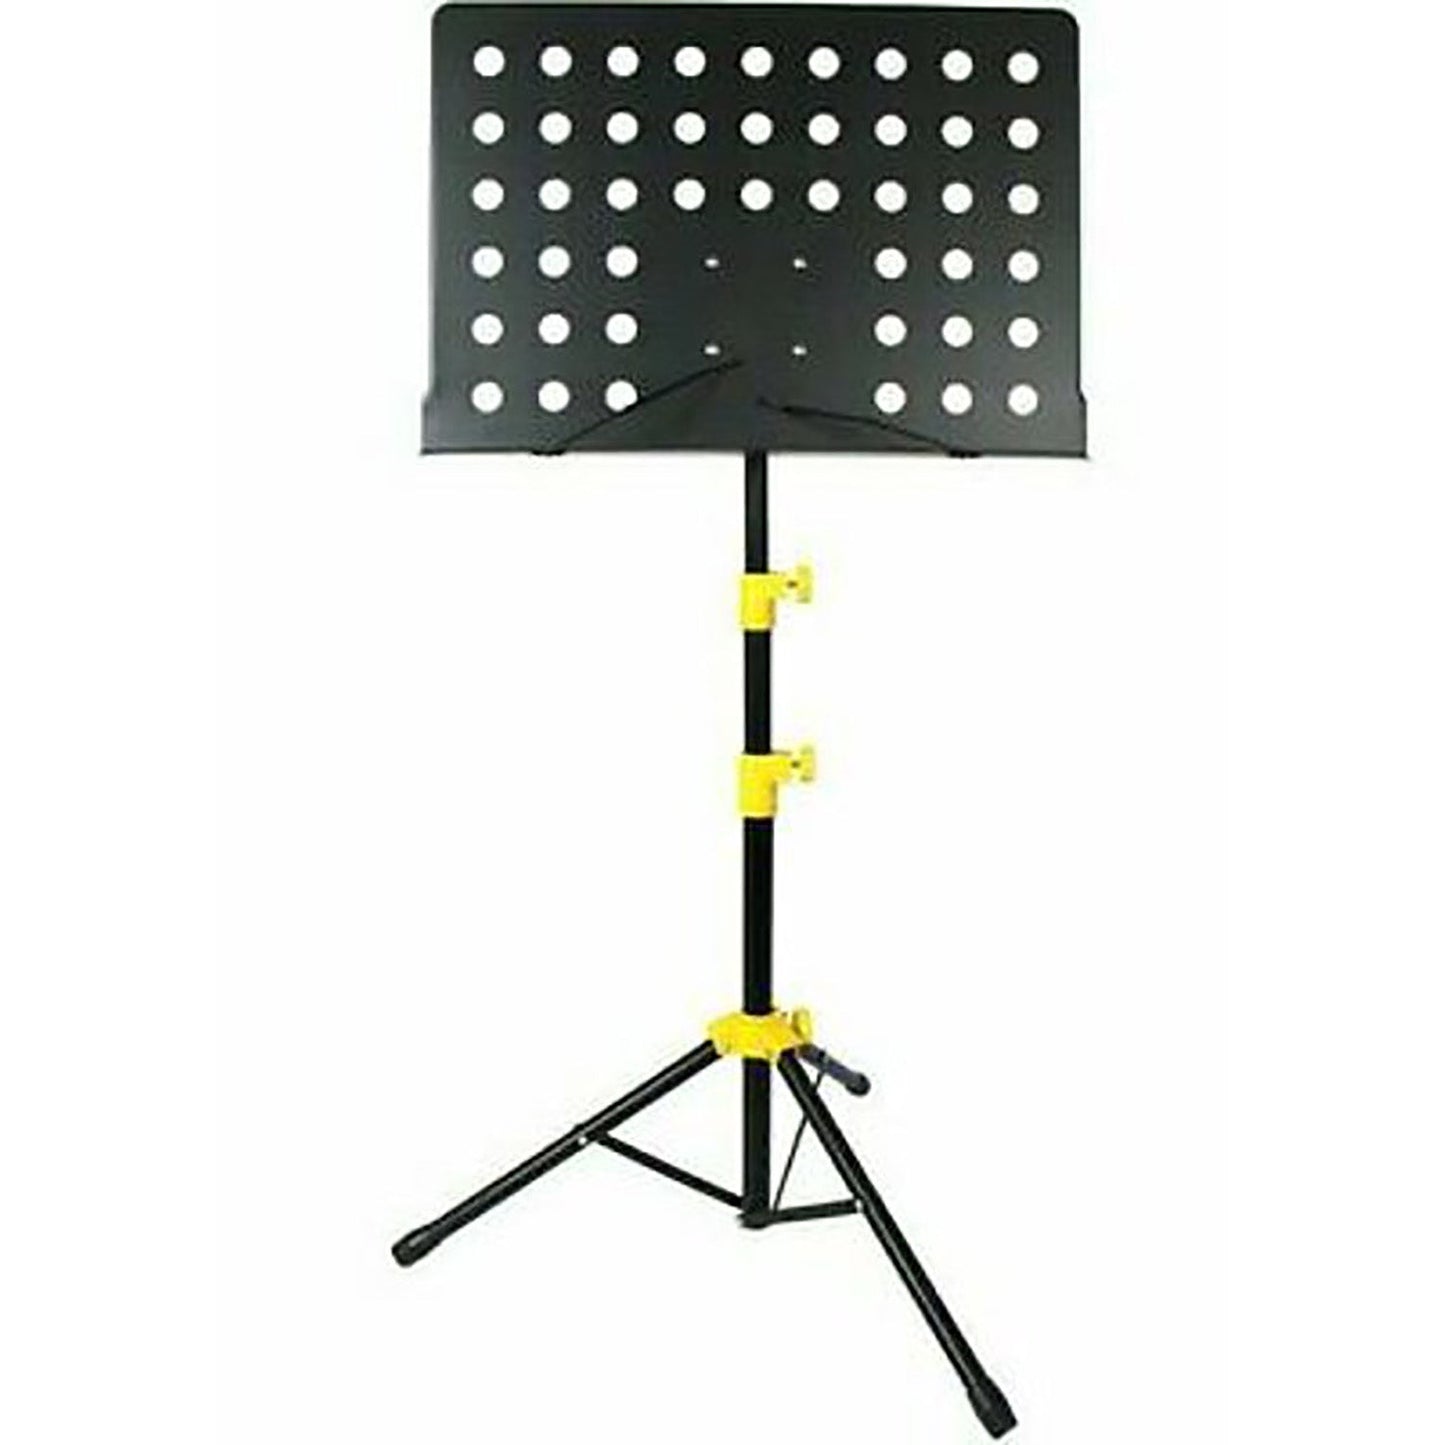 5 Core Sheet Music Stand Professional Folding Adjustable Portable Orchestra Music Sheet Stands, Heavy Duty Super Sturdy MUS YLW